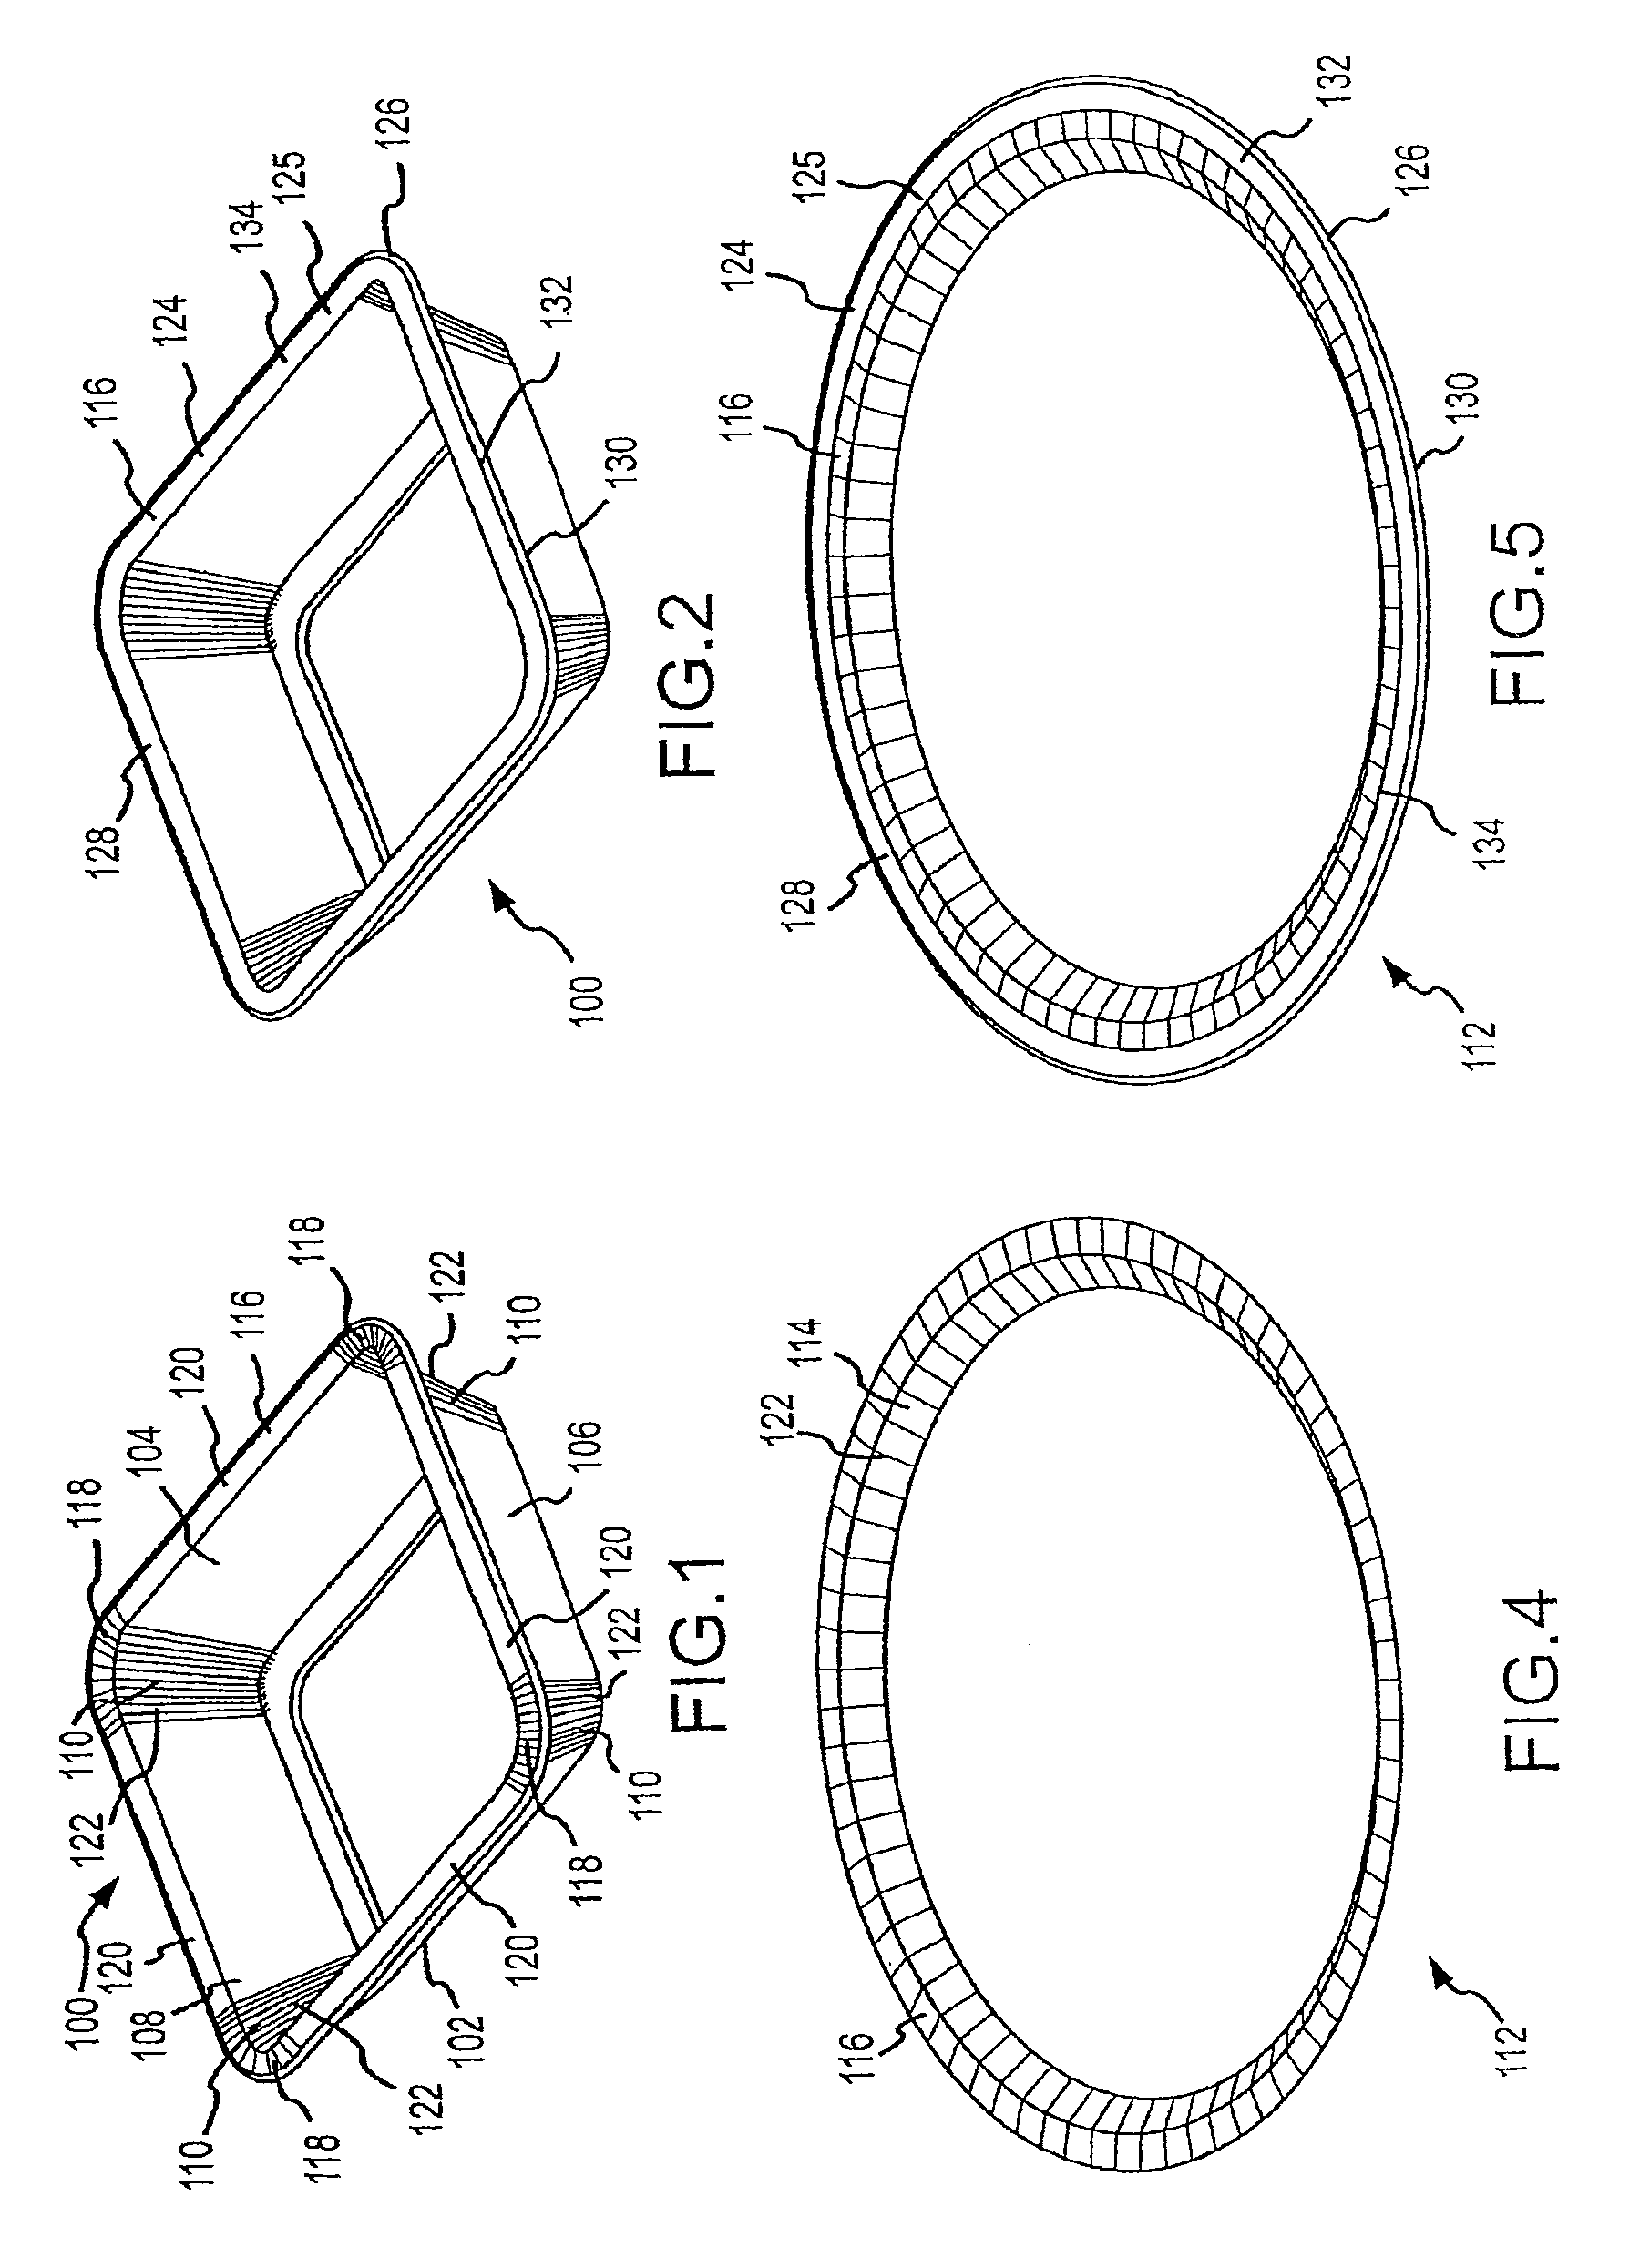 Method of forming container with a tool having an articulated section